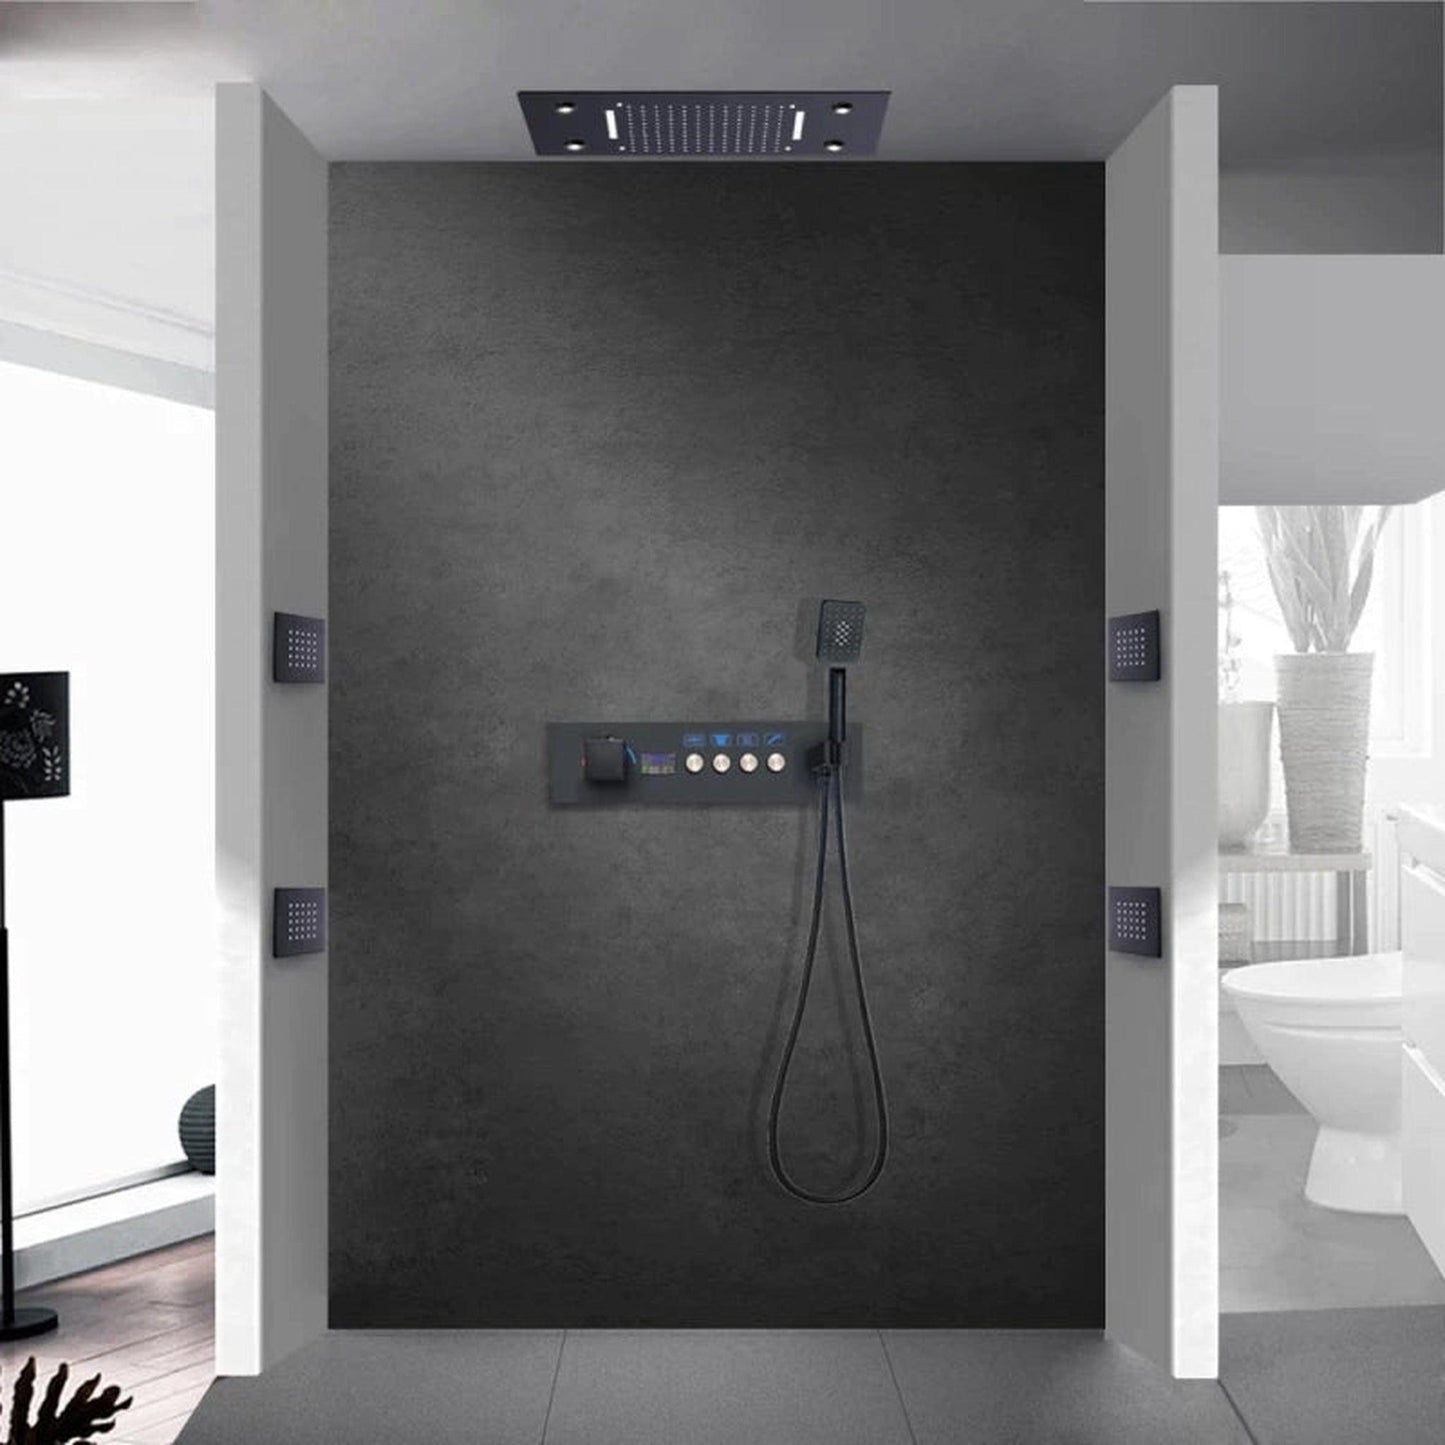 Fontana Cagliari Matte Black Recessed Ceiling Mounted Thermostatic LED Waterfall Rainfall Shower System With 6-Body Jets and Hand Shower